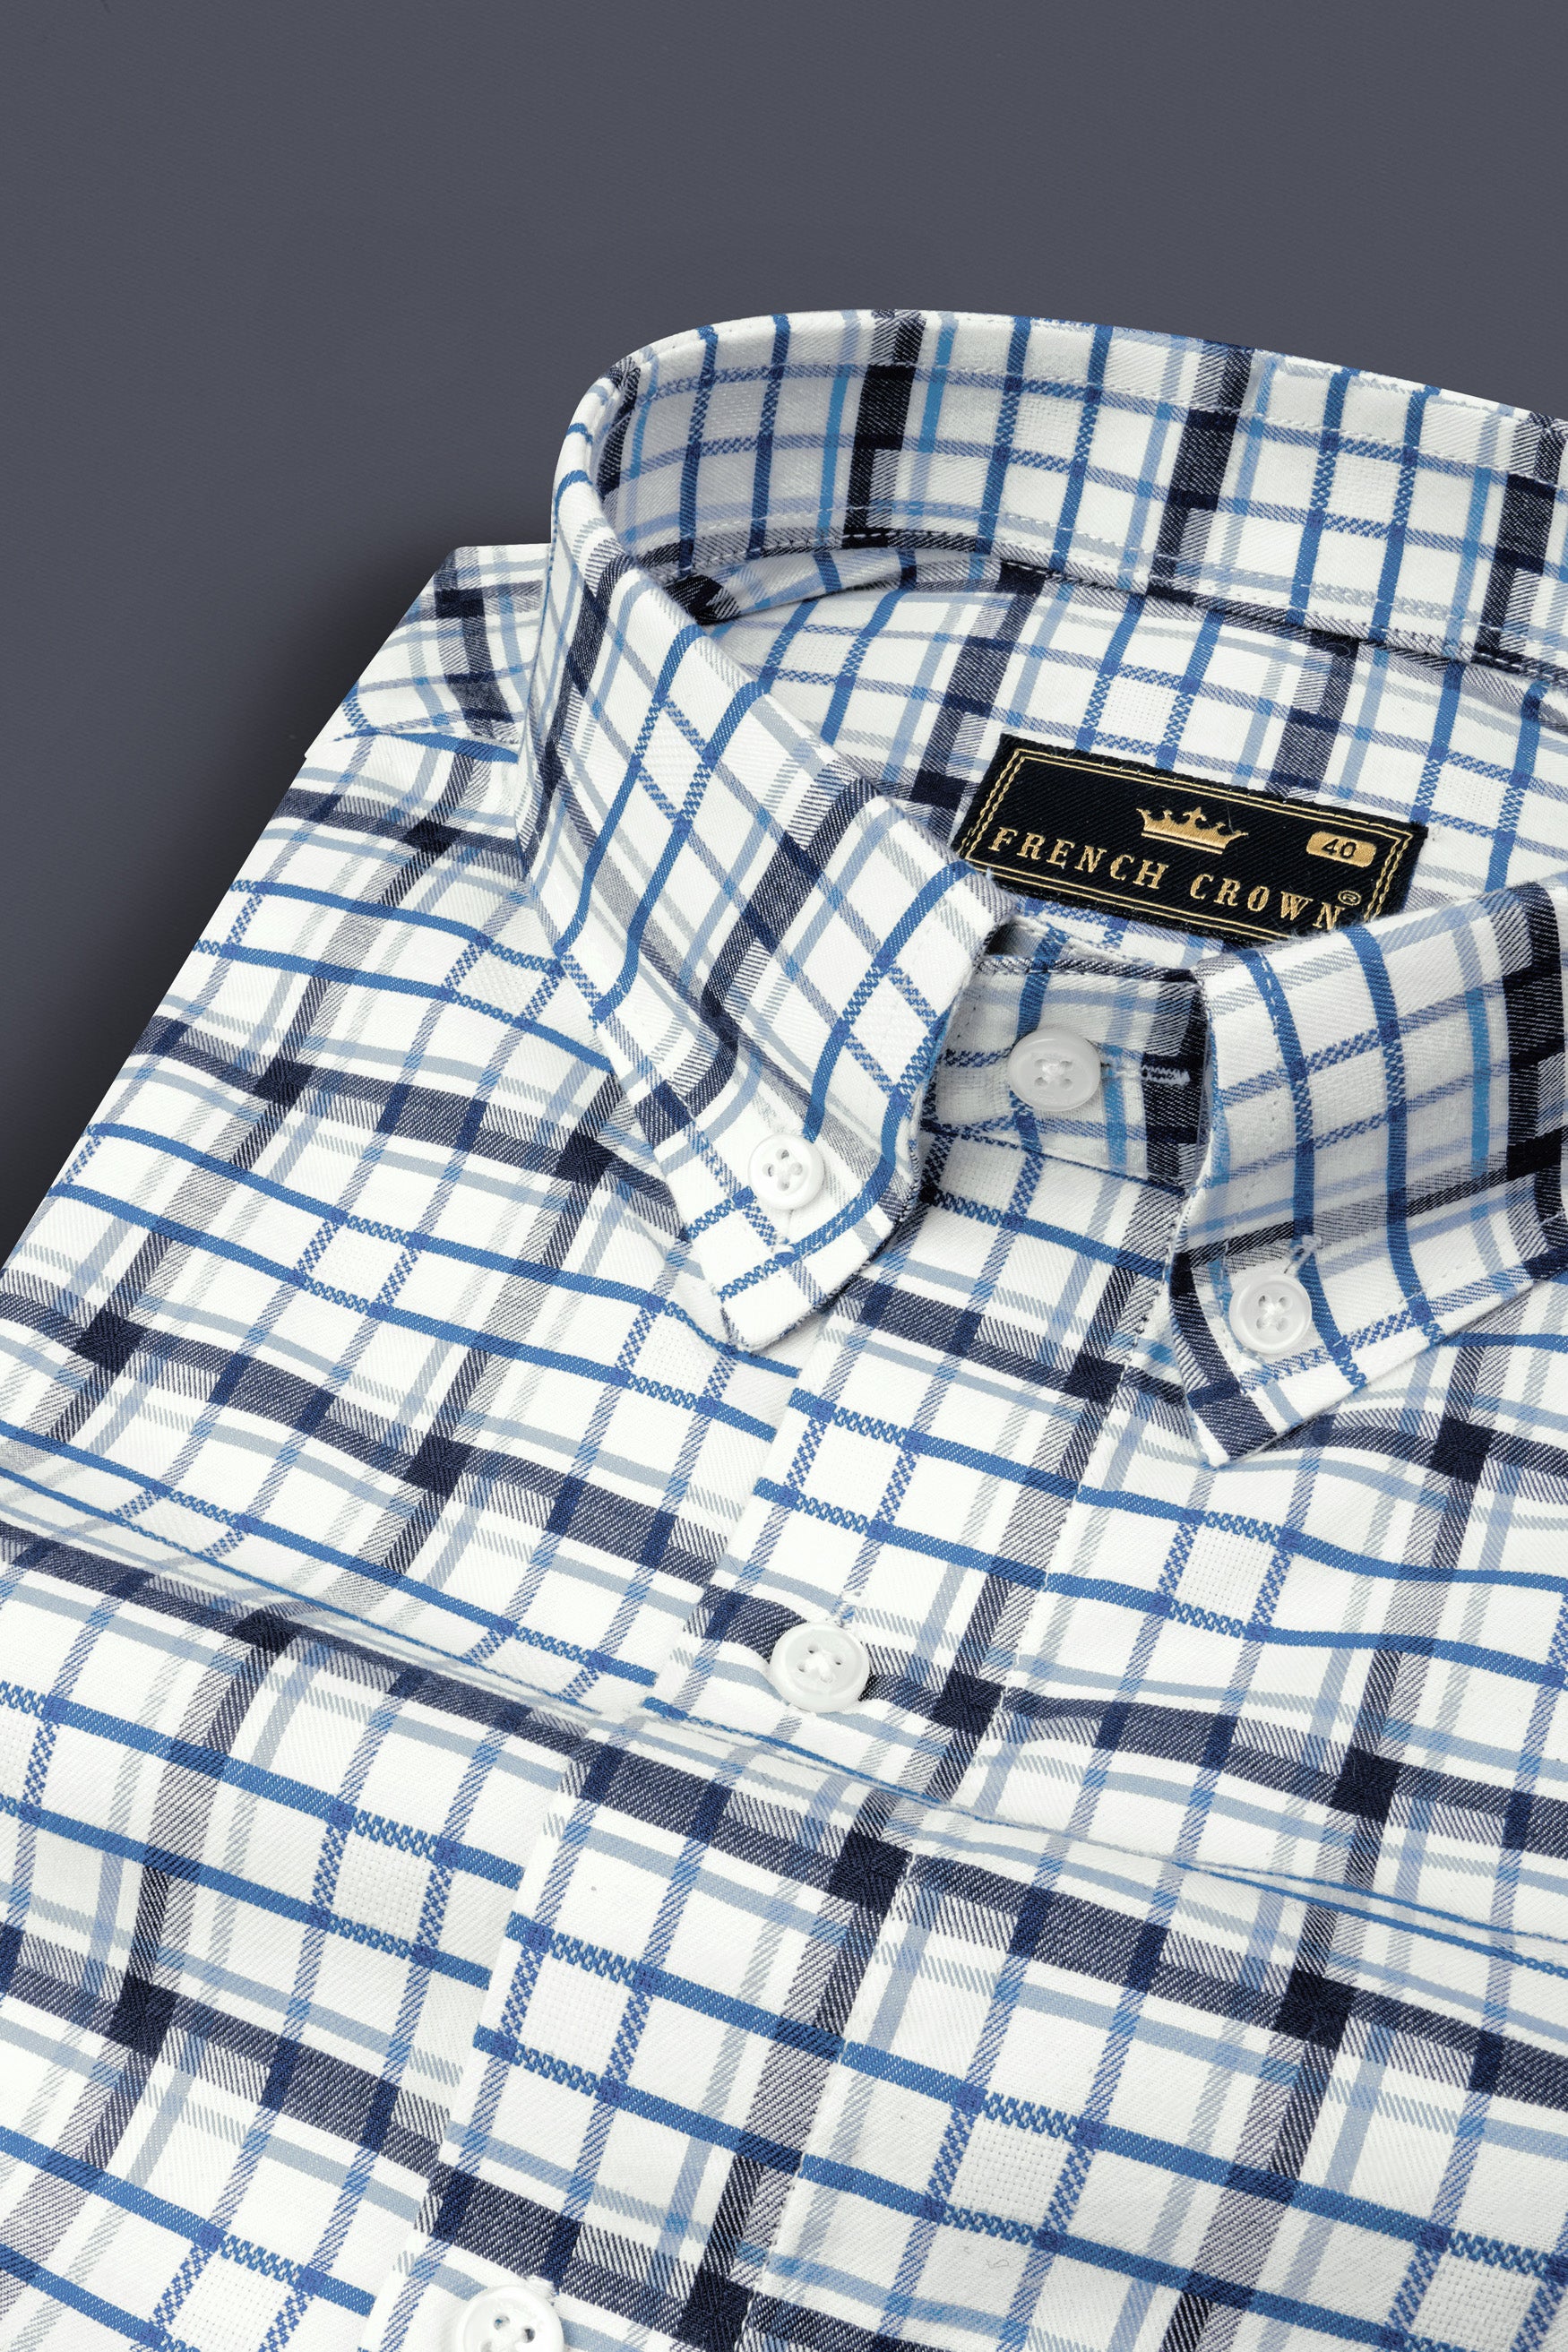 Limed Spruce Navy Blue and Metallic Blue and white Twill Plaid Premium Cotton Shirt